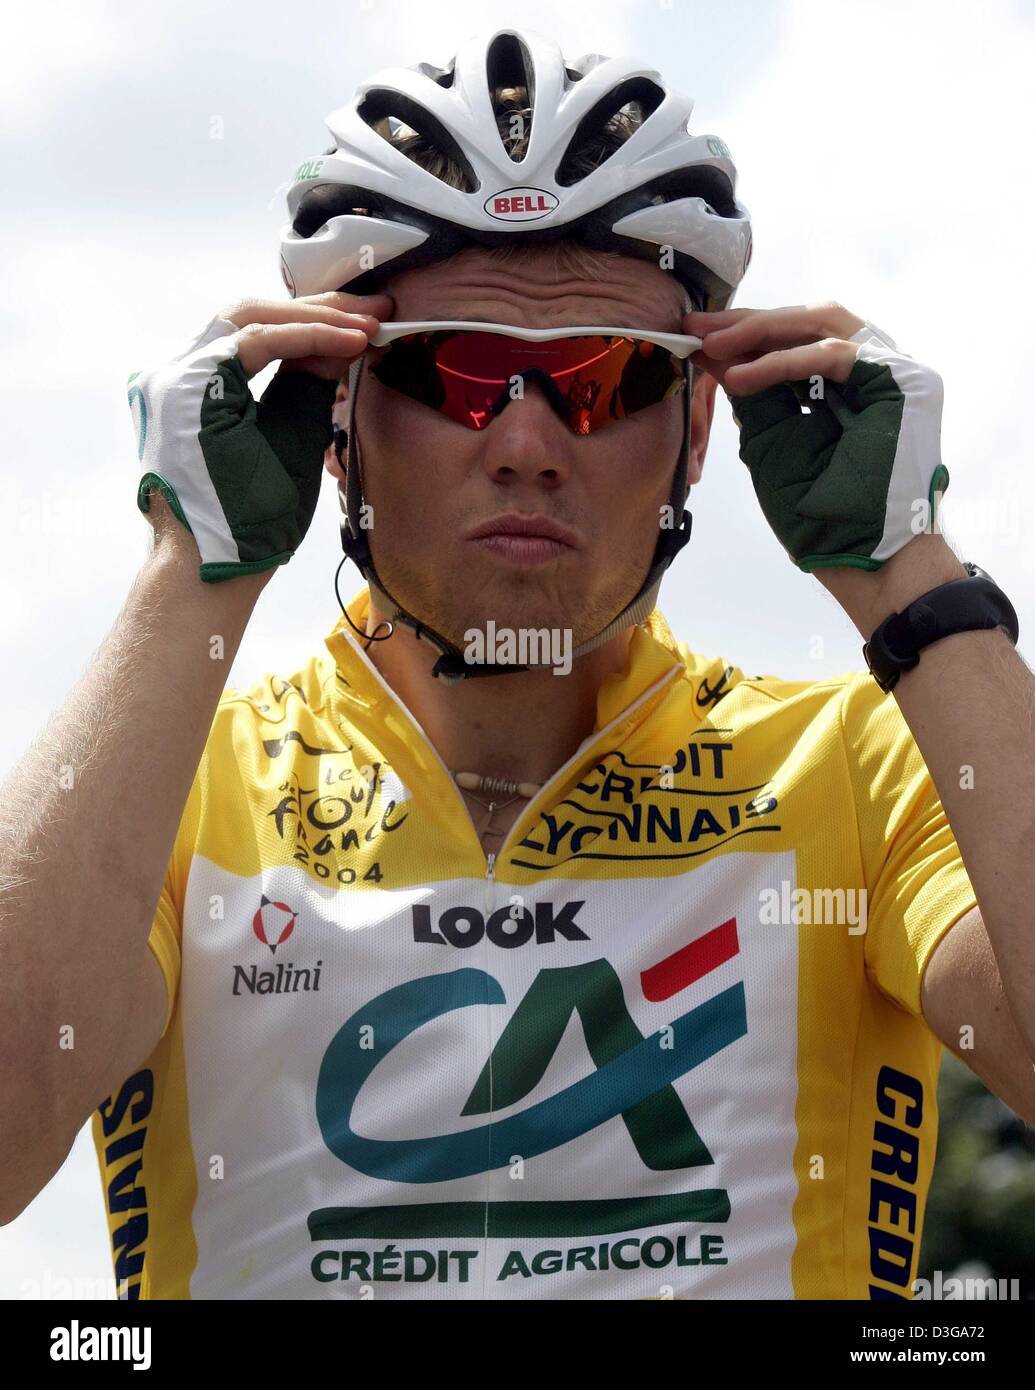 (dpa) - Norwegian cyclist Thor Hushovd of team Credit Agricole, who wears the yellow jersey of the overall leader, adjusts his sunglasses before the start of the third stage of the Tour de France in Waterloo, Belgium, 6 July 2004. The third and 210km long stage of the 91st Tour de France cycling race takes the cyclists from Waterloo to Wasquehal, France. Stock Photo